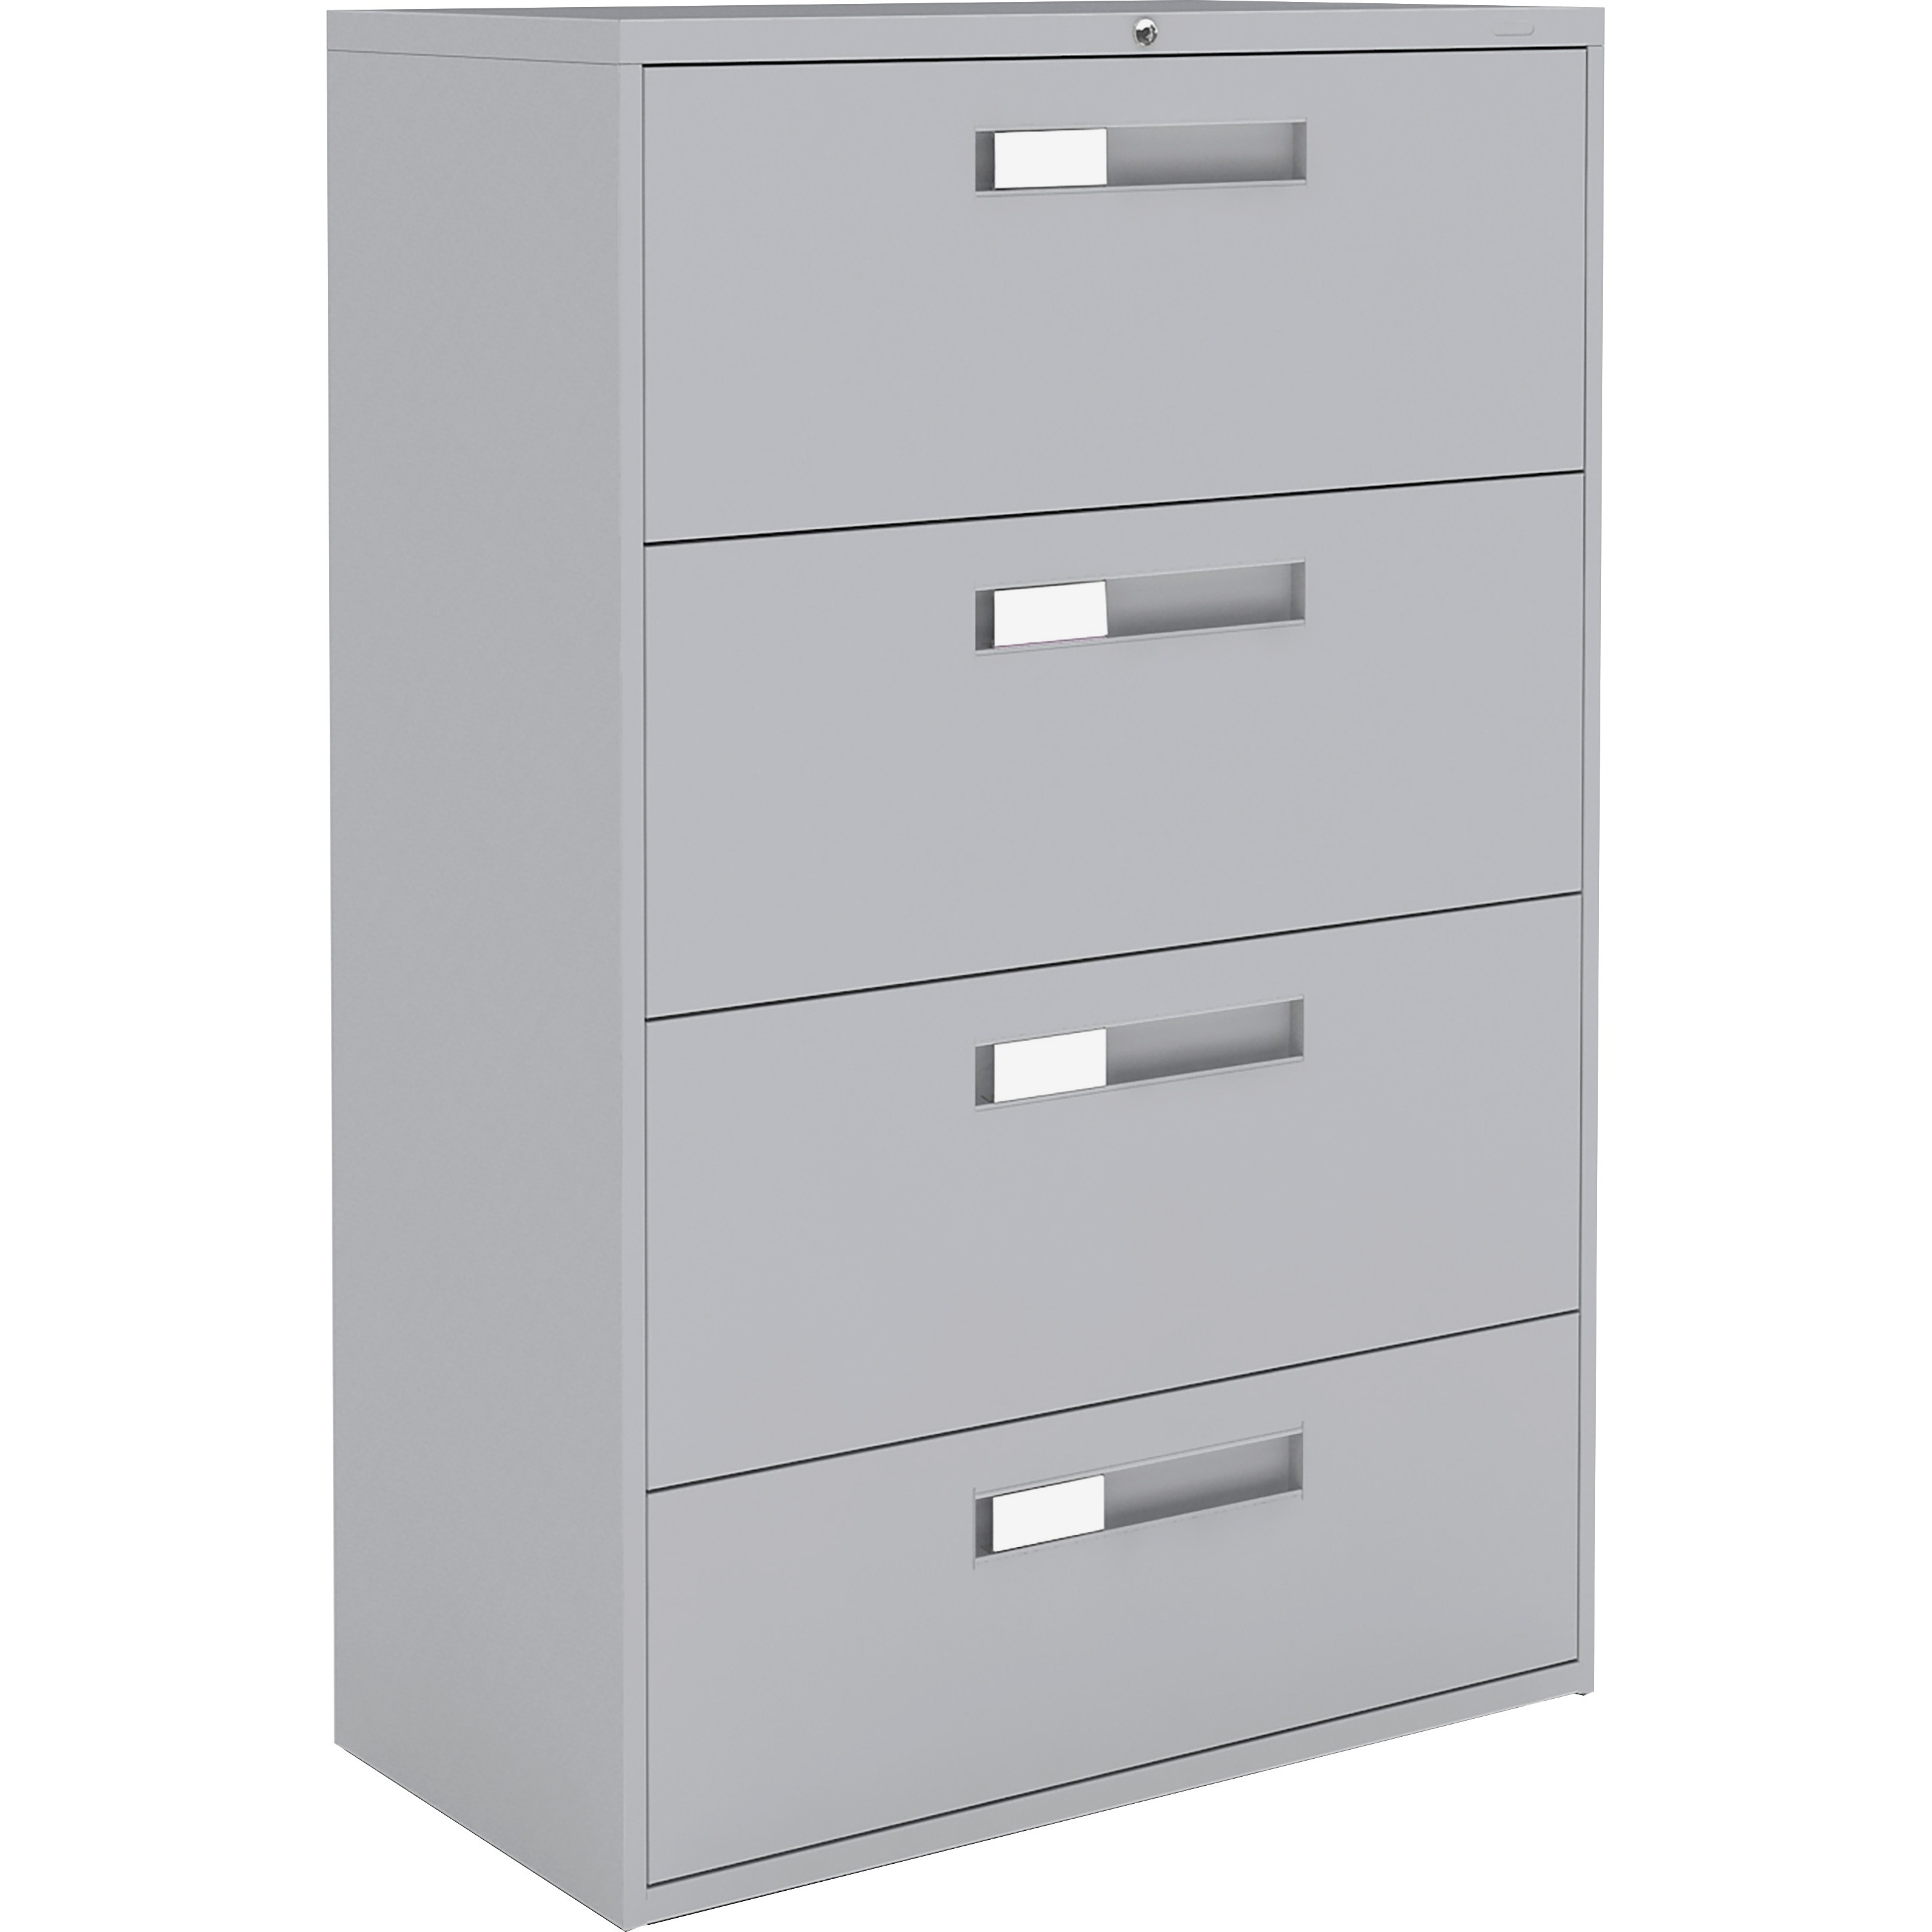 Global 9300 Series Centre Pull Lateral File 36 X 18 X 54 4